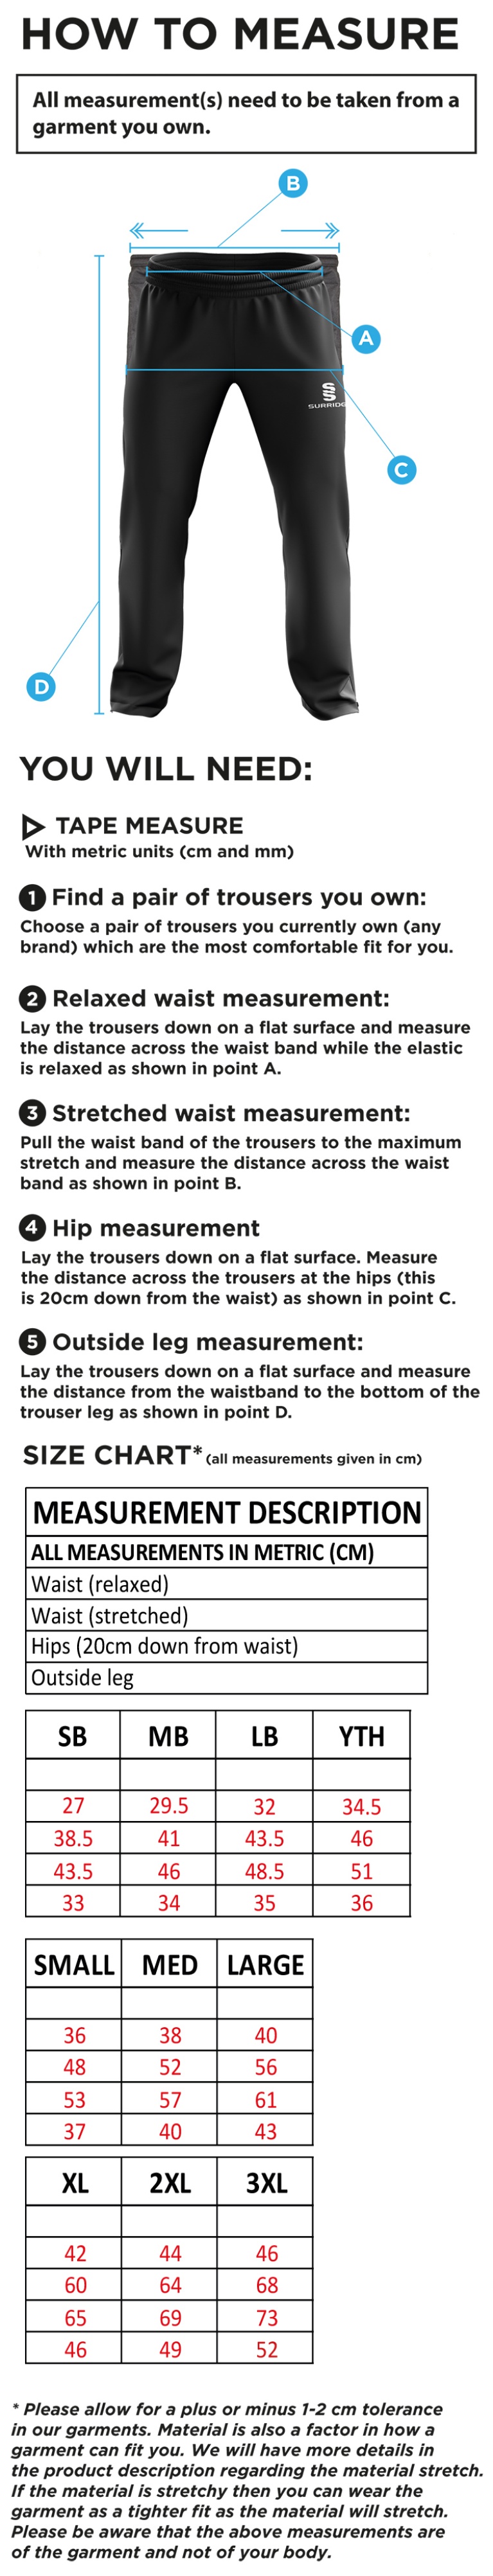 Hornchurch Athletic CC - Ripstop Track Pants - Size Guide